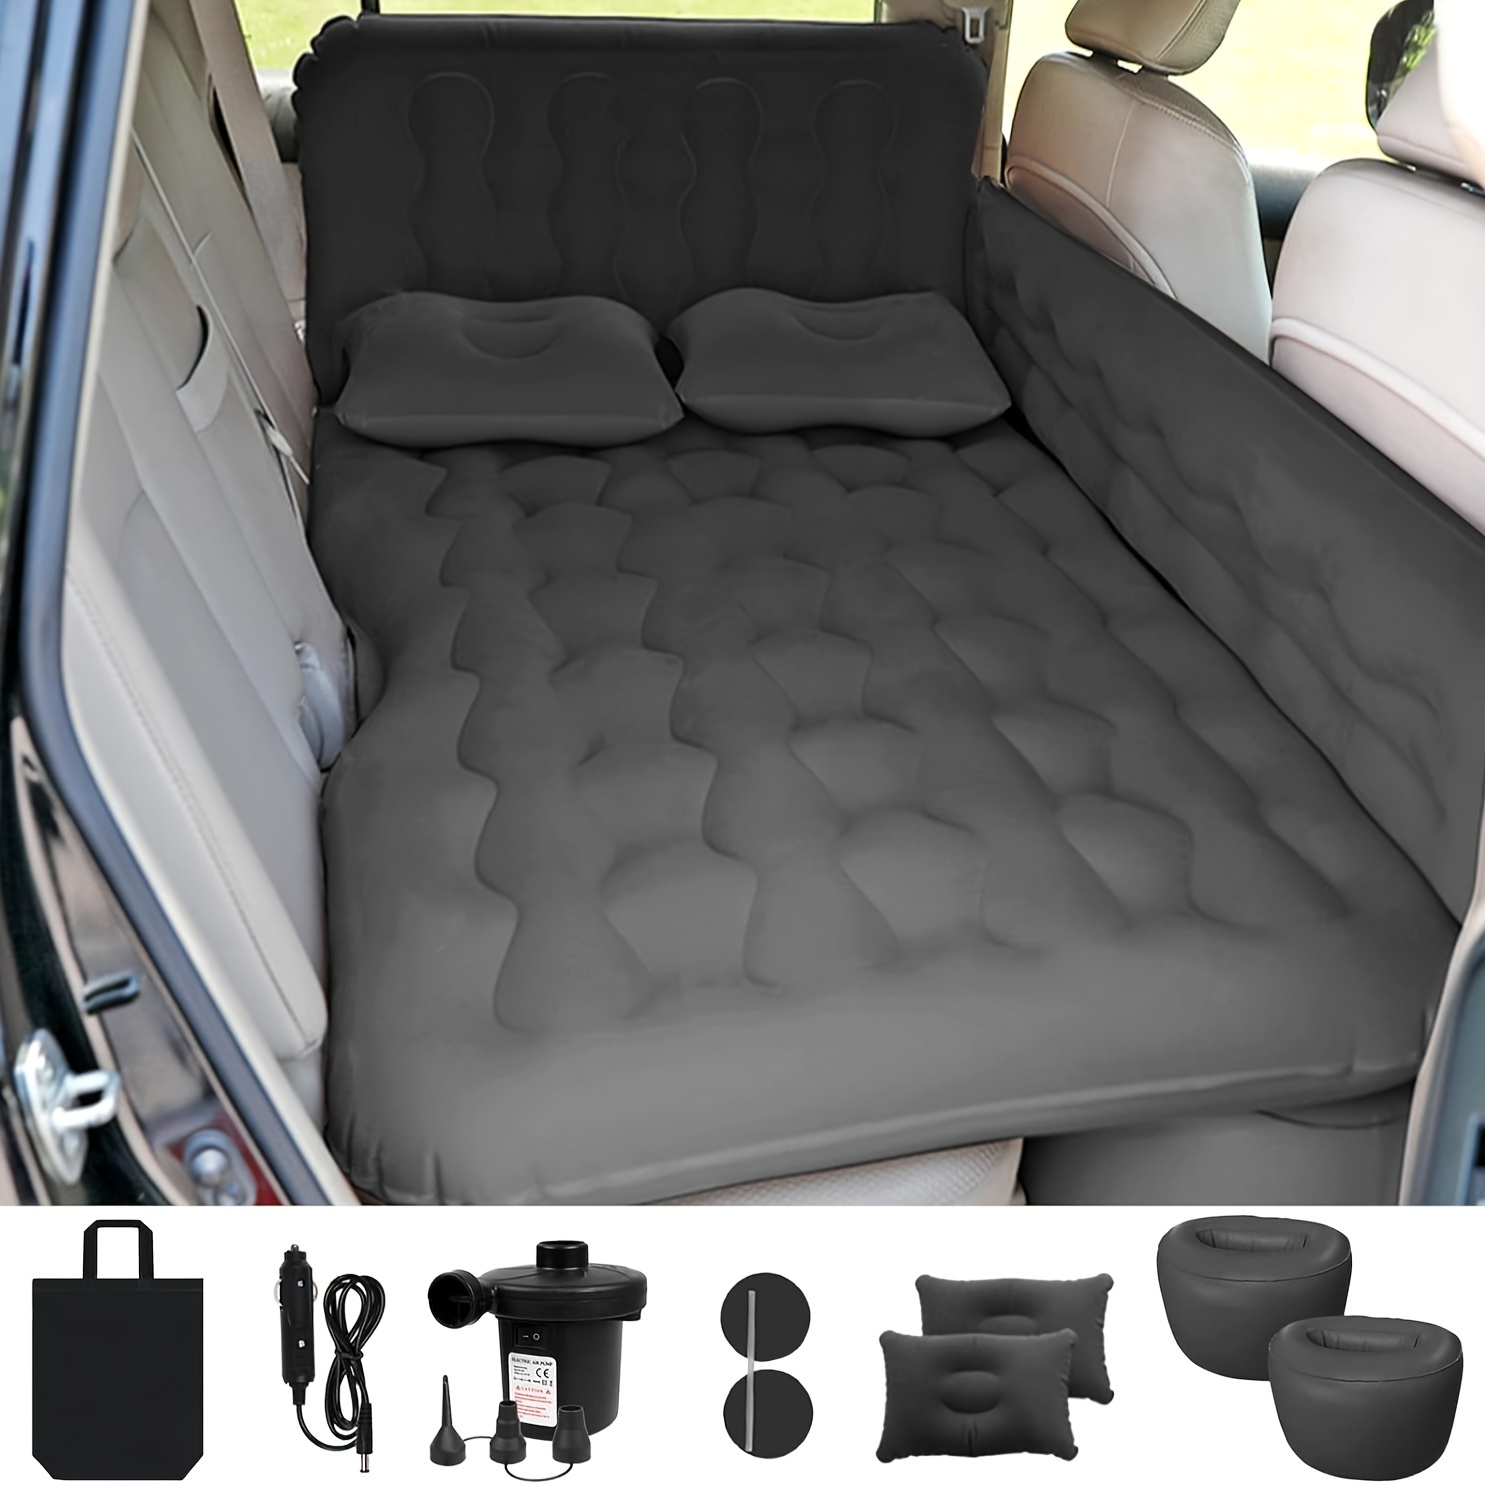 

Inflatable Mattress, Thickened Sedan Suv Dual Car Air Cushion Side Flocking Travel Inflatable Car Mattress Bed With Electric Air Pump And 2 Pillows, Car Sofa Bed For Home Outdoor And Travel